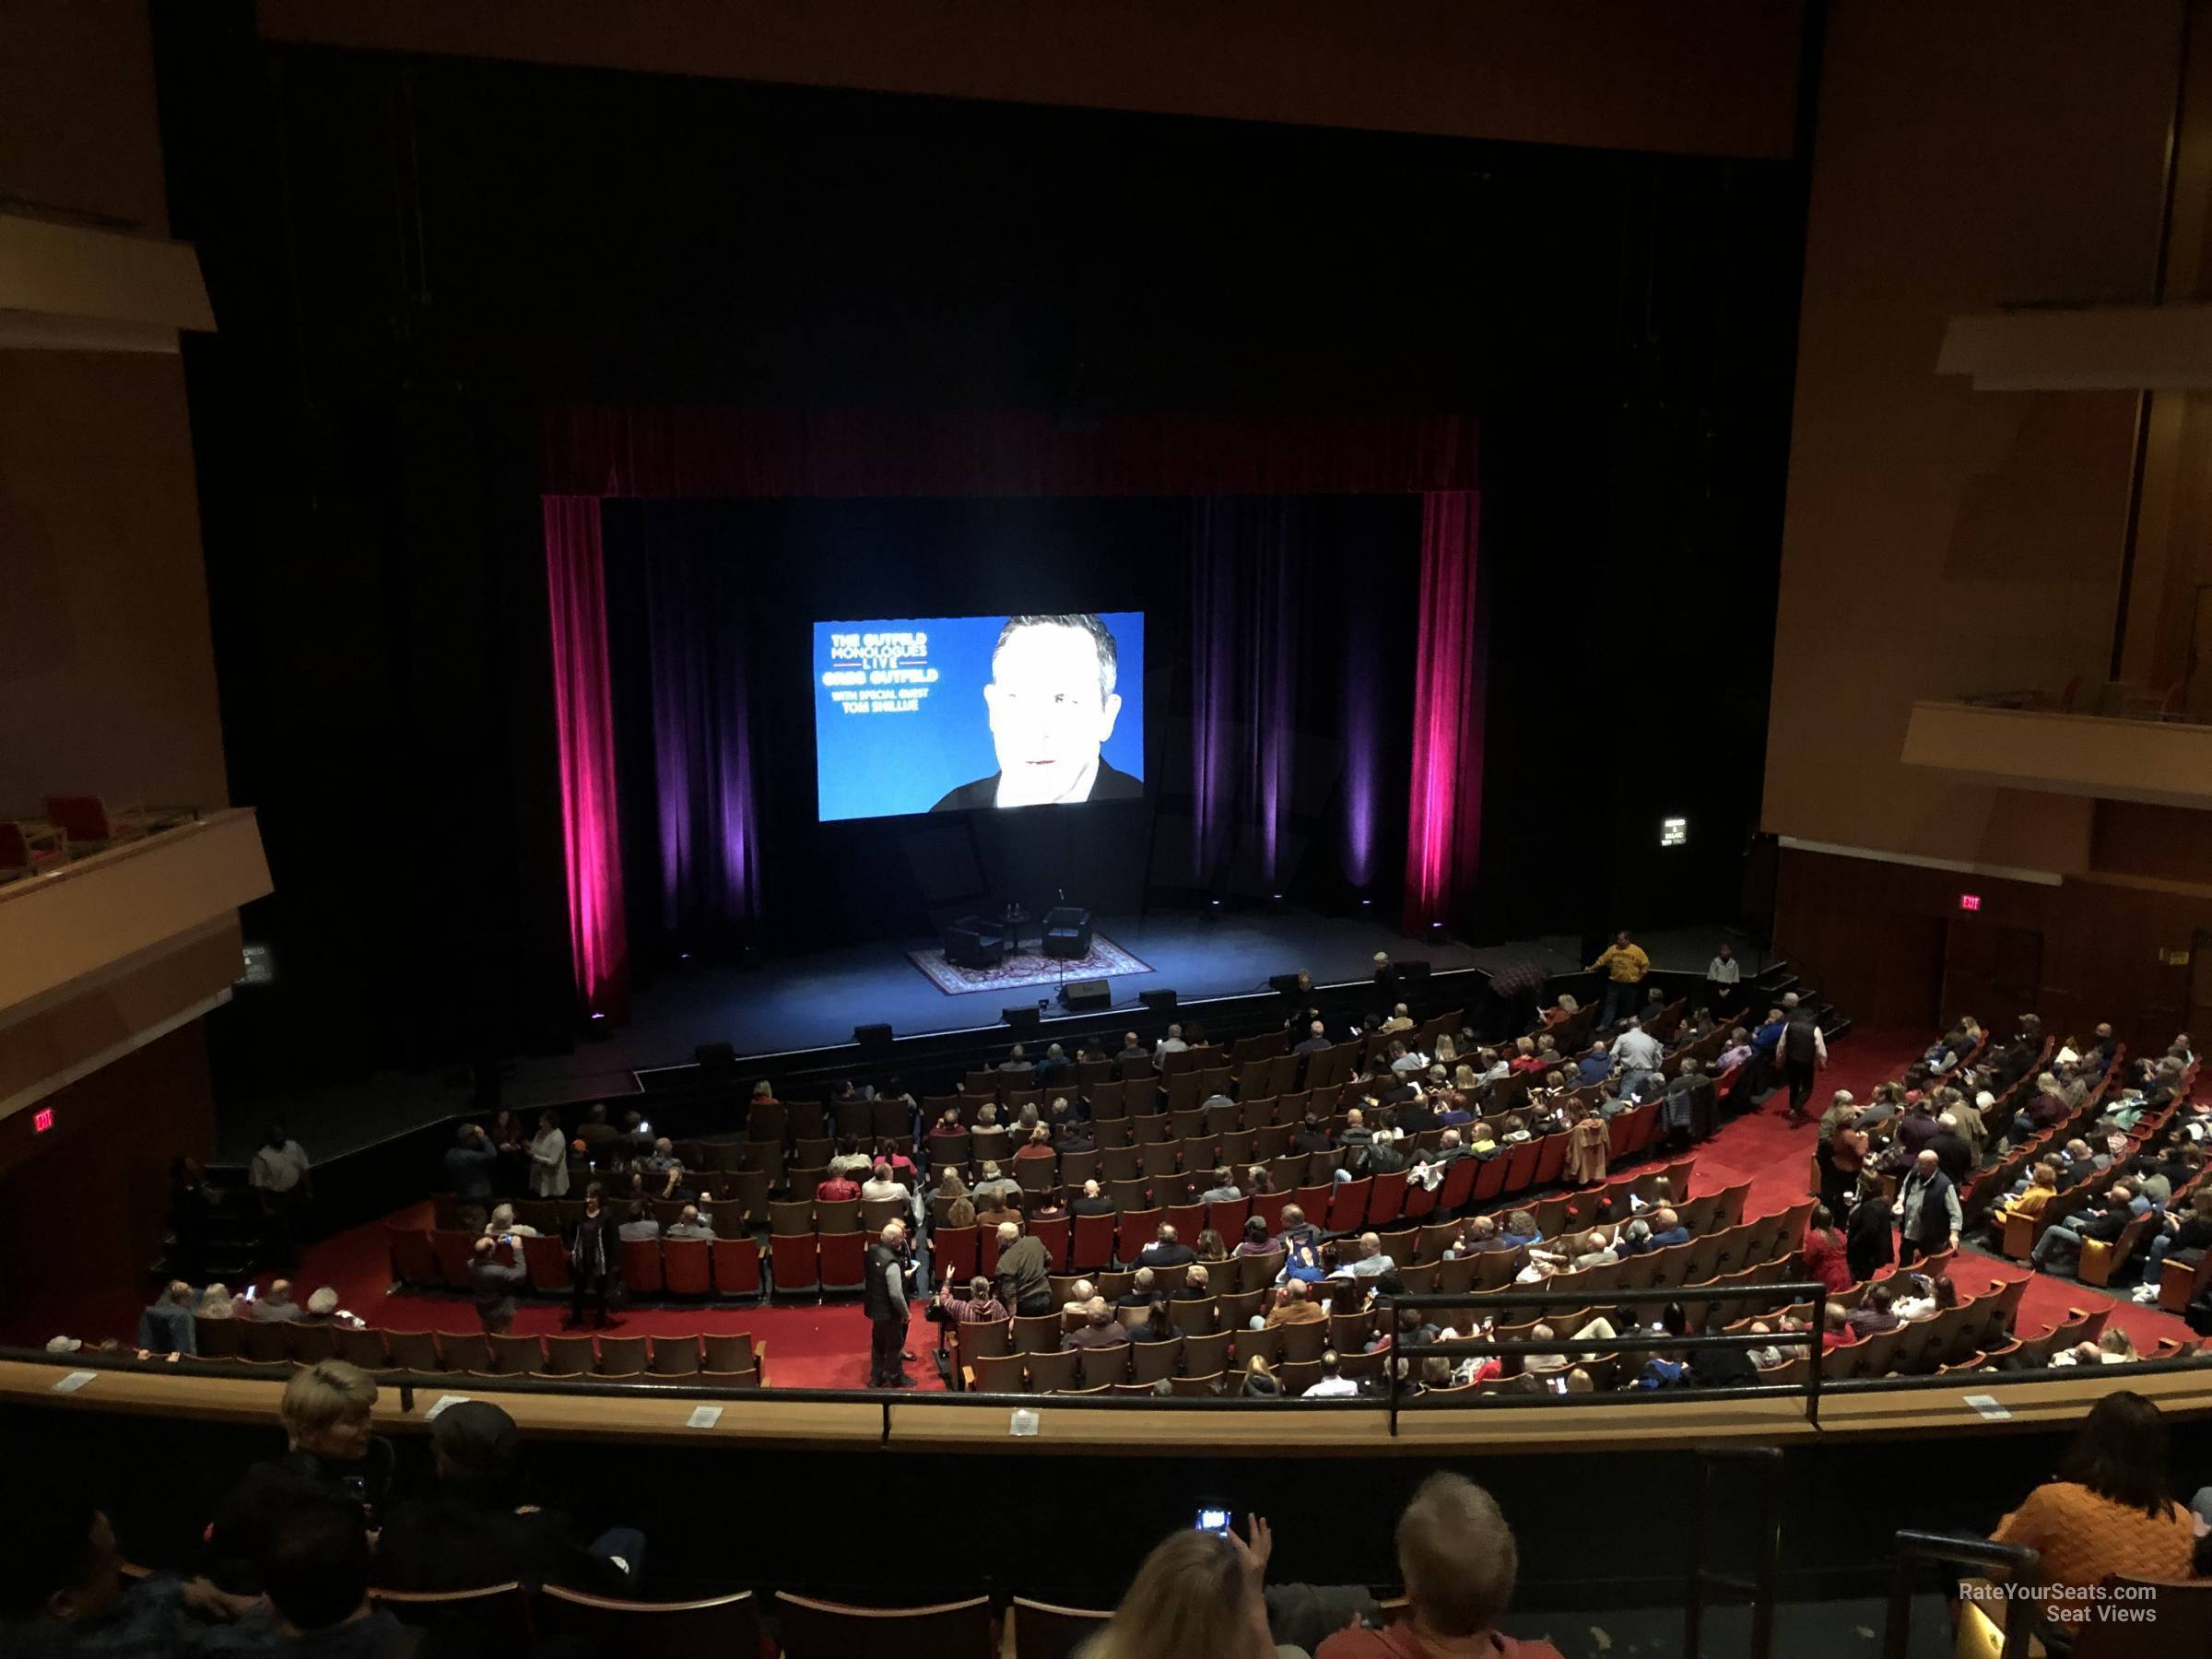 grand tier 5, row f seat view  - durham performing arts center